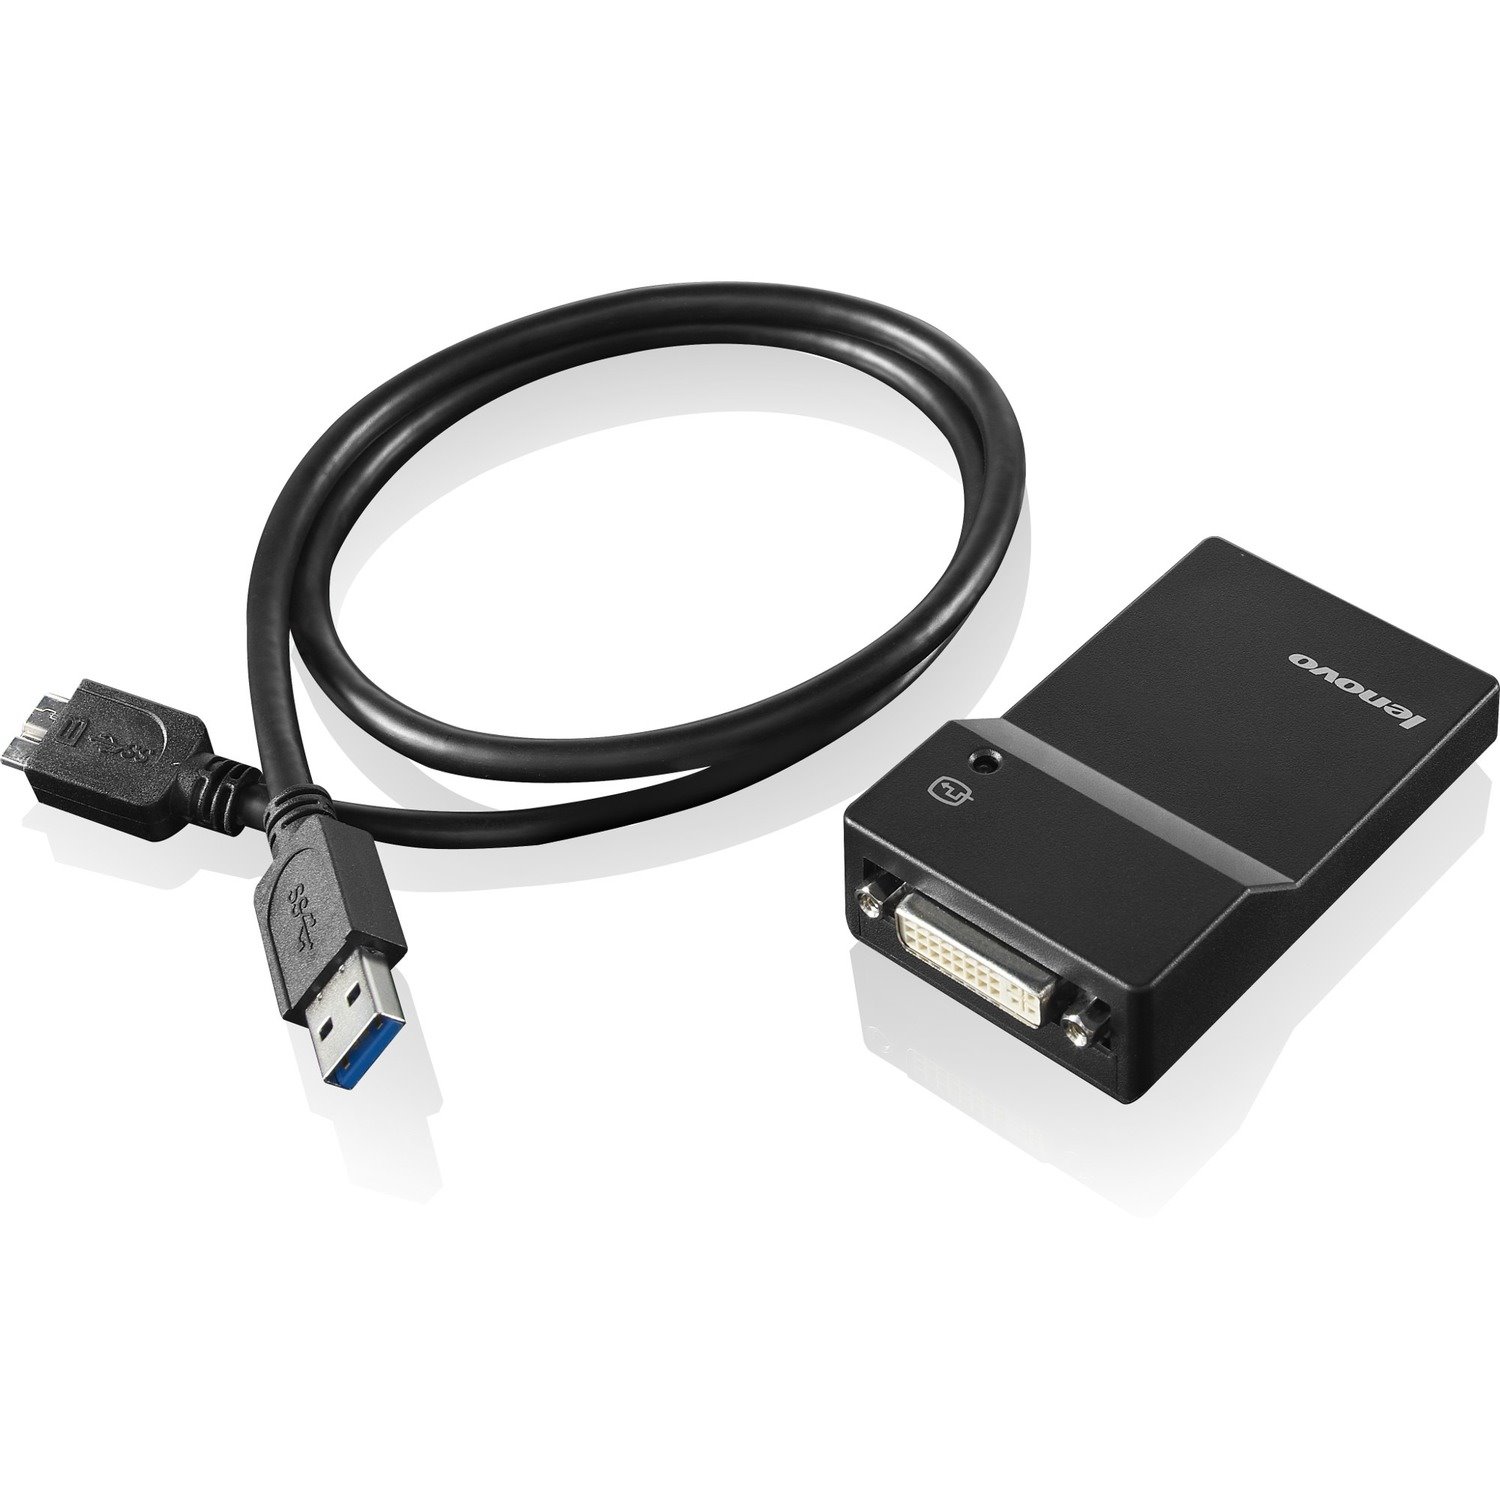 Lenovo - Open Source Graphic Adapter